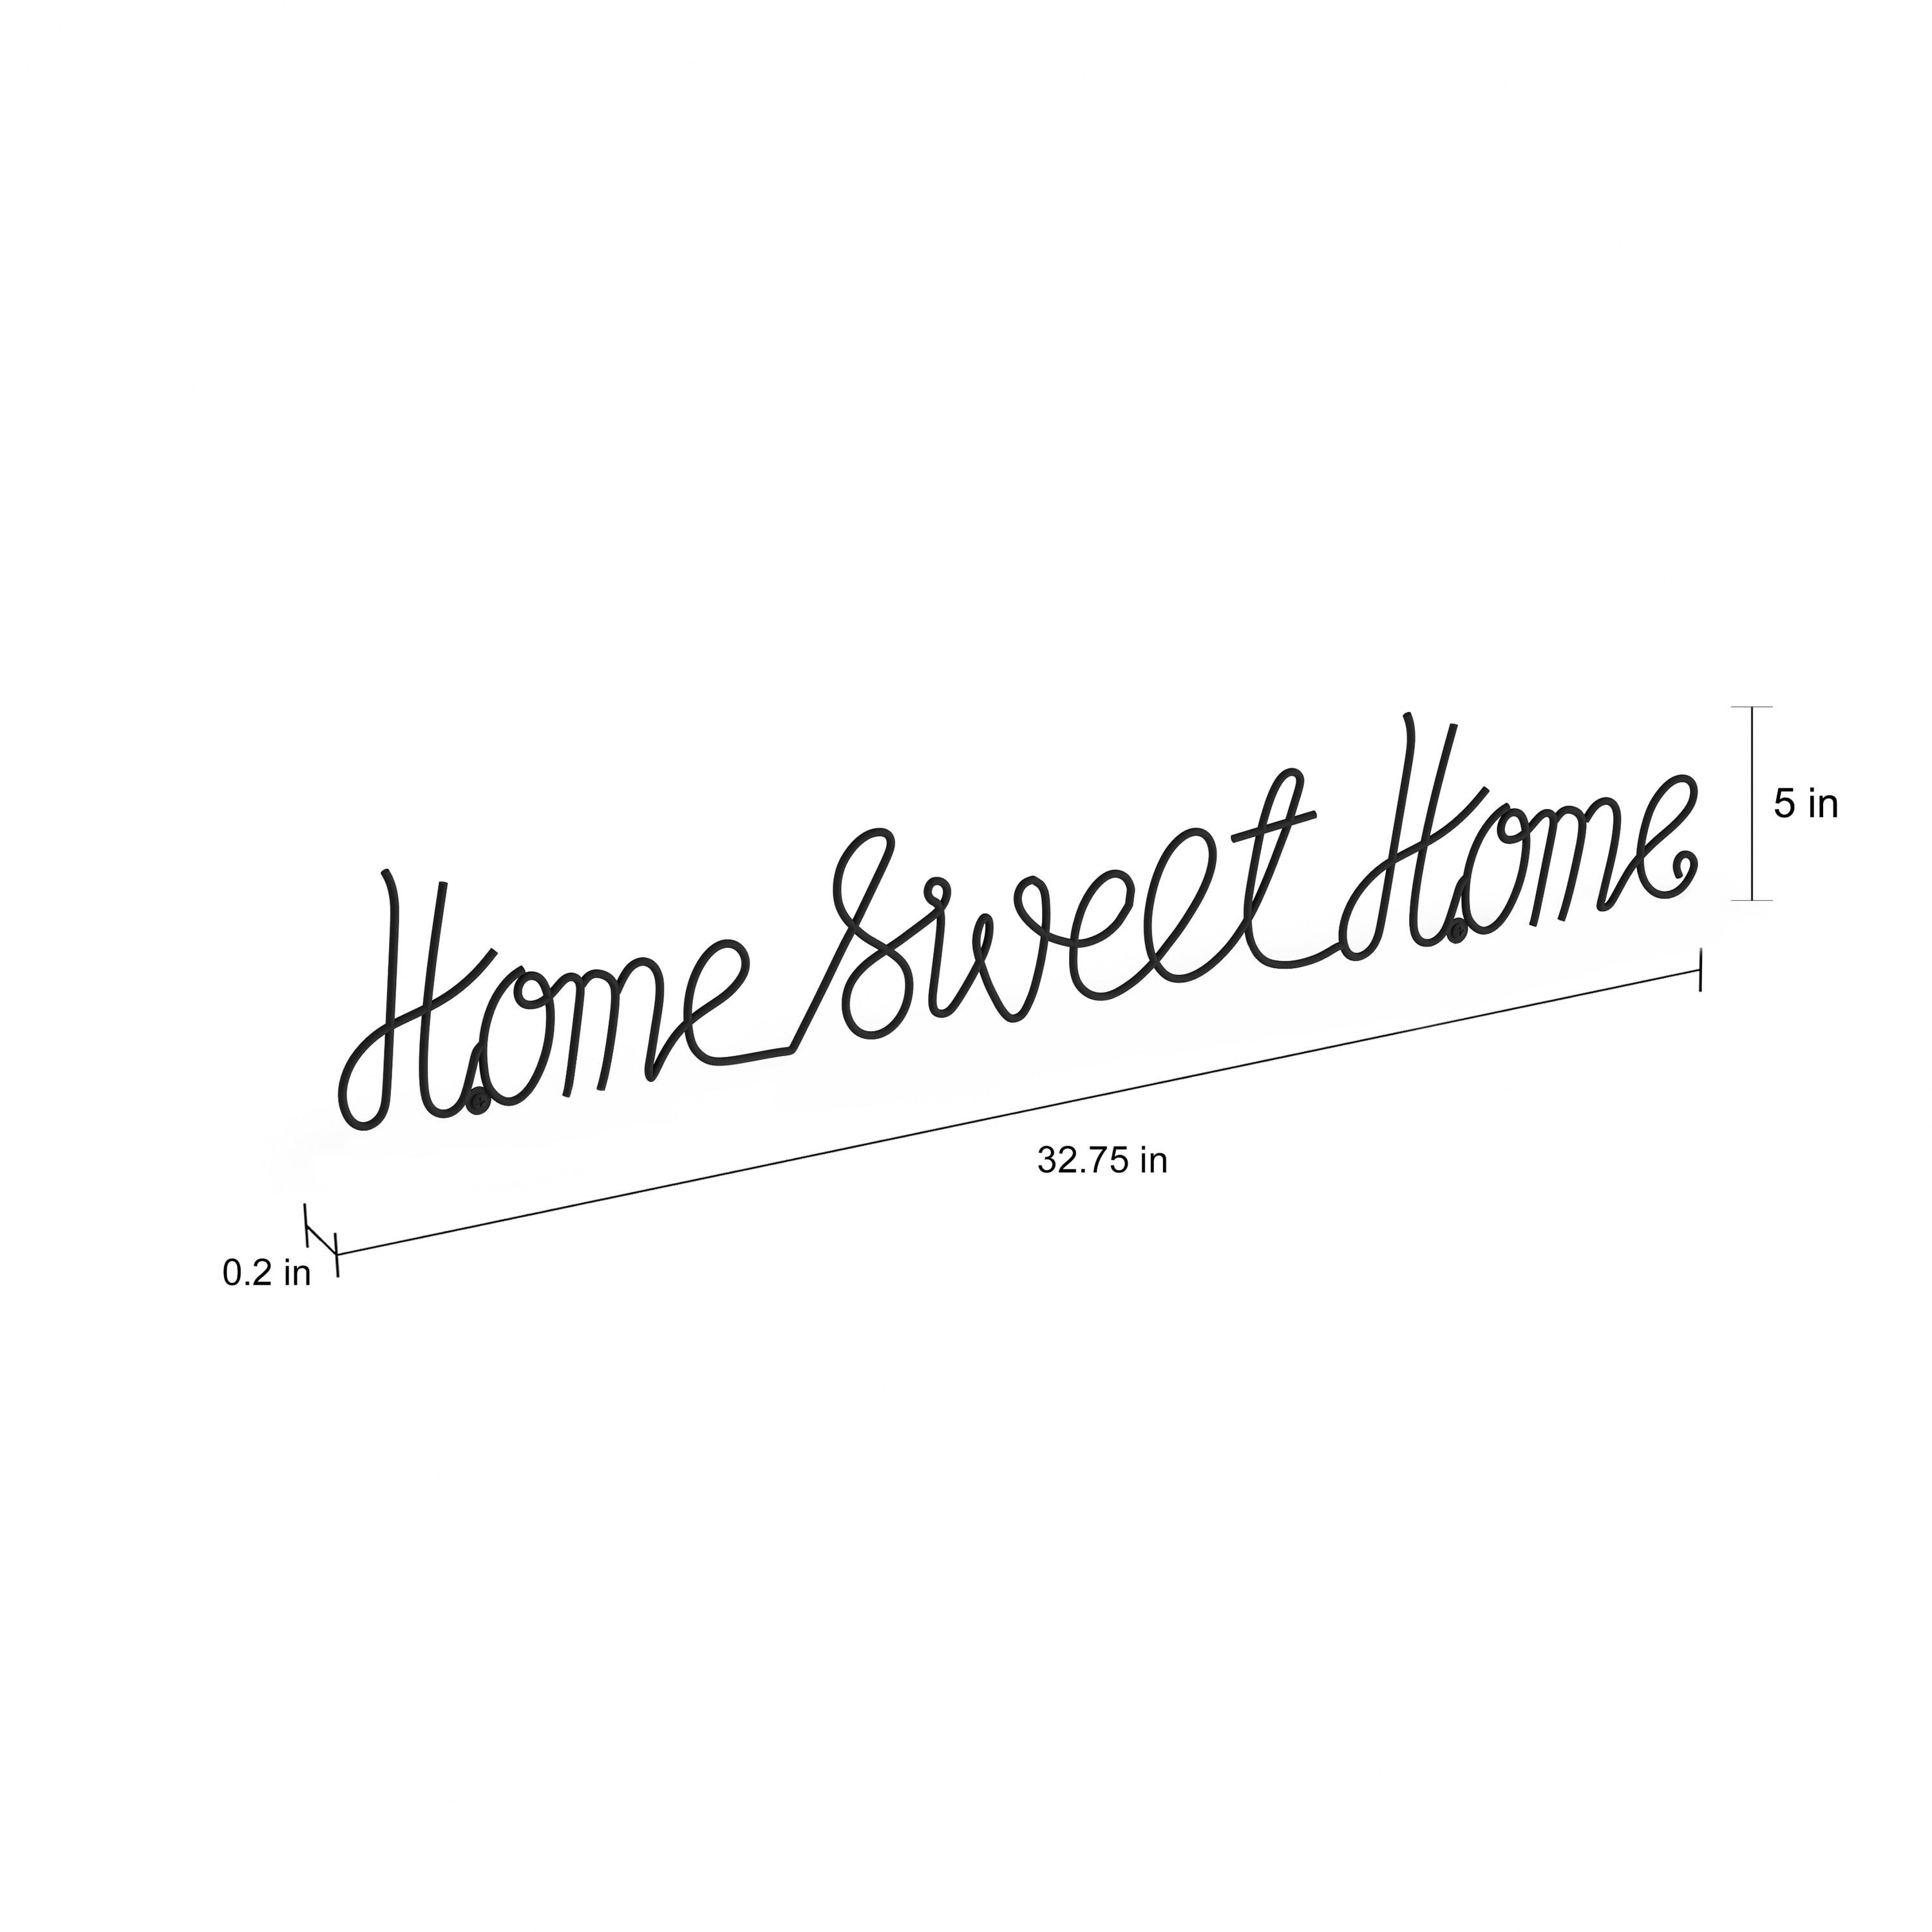 STANLEY Rustic Home Sweet Home Sign Gift 8x24 Metal Decor